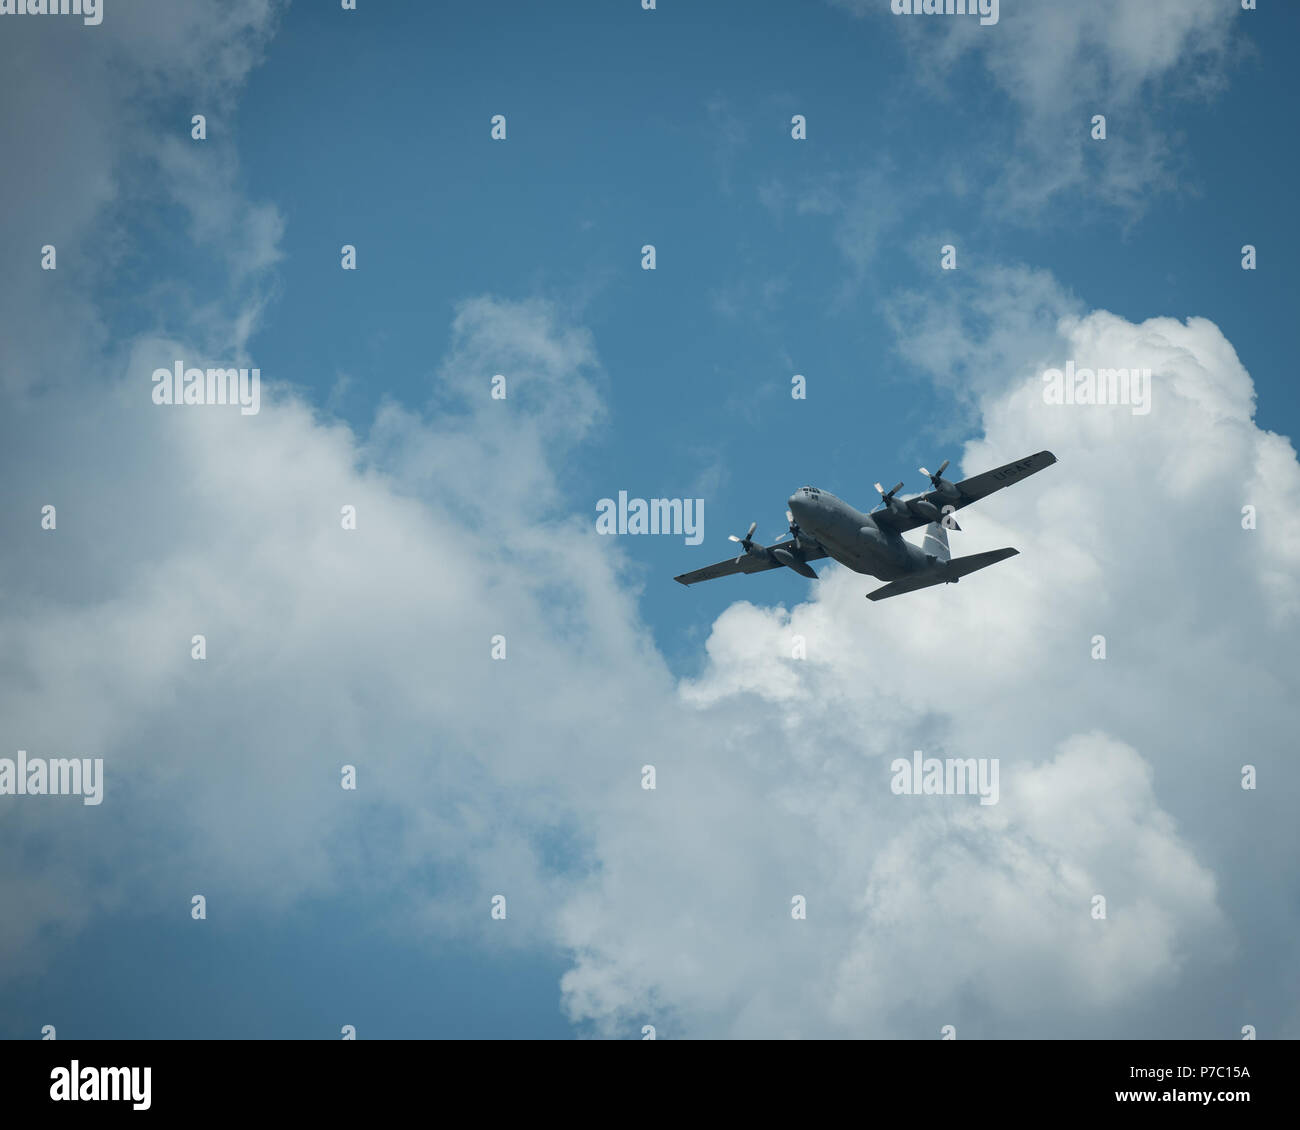 A C-130 Hercules aircraft flies over the Kentucky Air National Guard Base in Louisville, Ky., July 4, 2018, carrying Air National Guardsmen from the 123rd Airlift Wing who were returning from a deployment to the Persian Gulf. The Airmen have been flying troops and cargo across the U.S. Central Command Area of Responsibility since March in support of Operation Inherent Resolve. (U.S. Air National Guard photo by Lt. Col. Dale Greer) Stock Photo